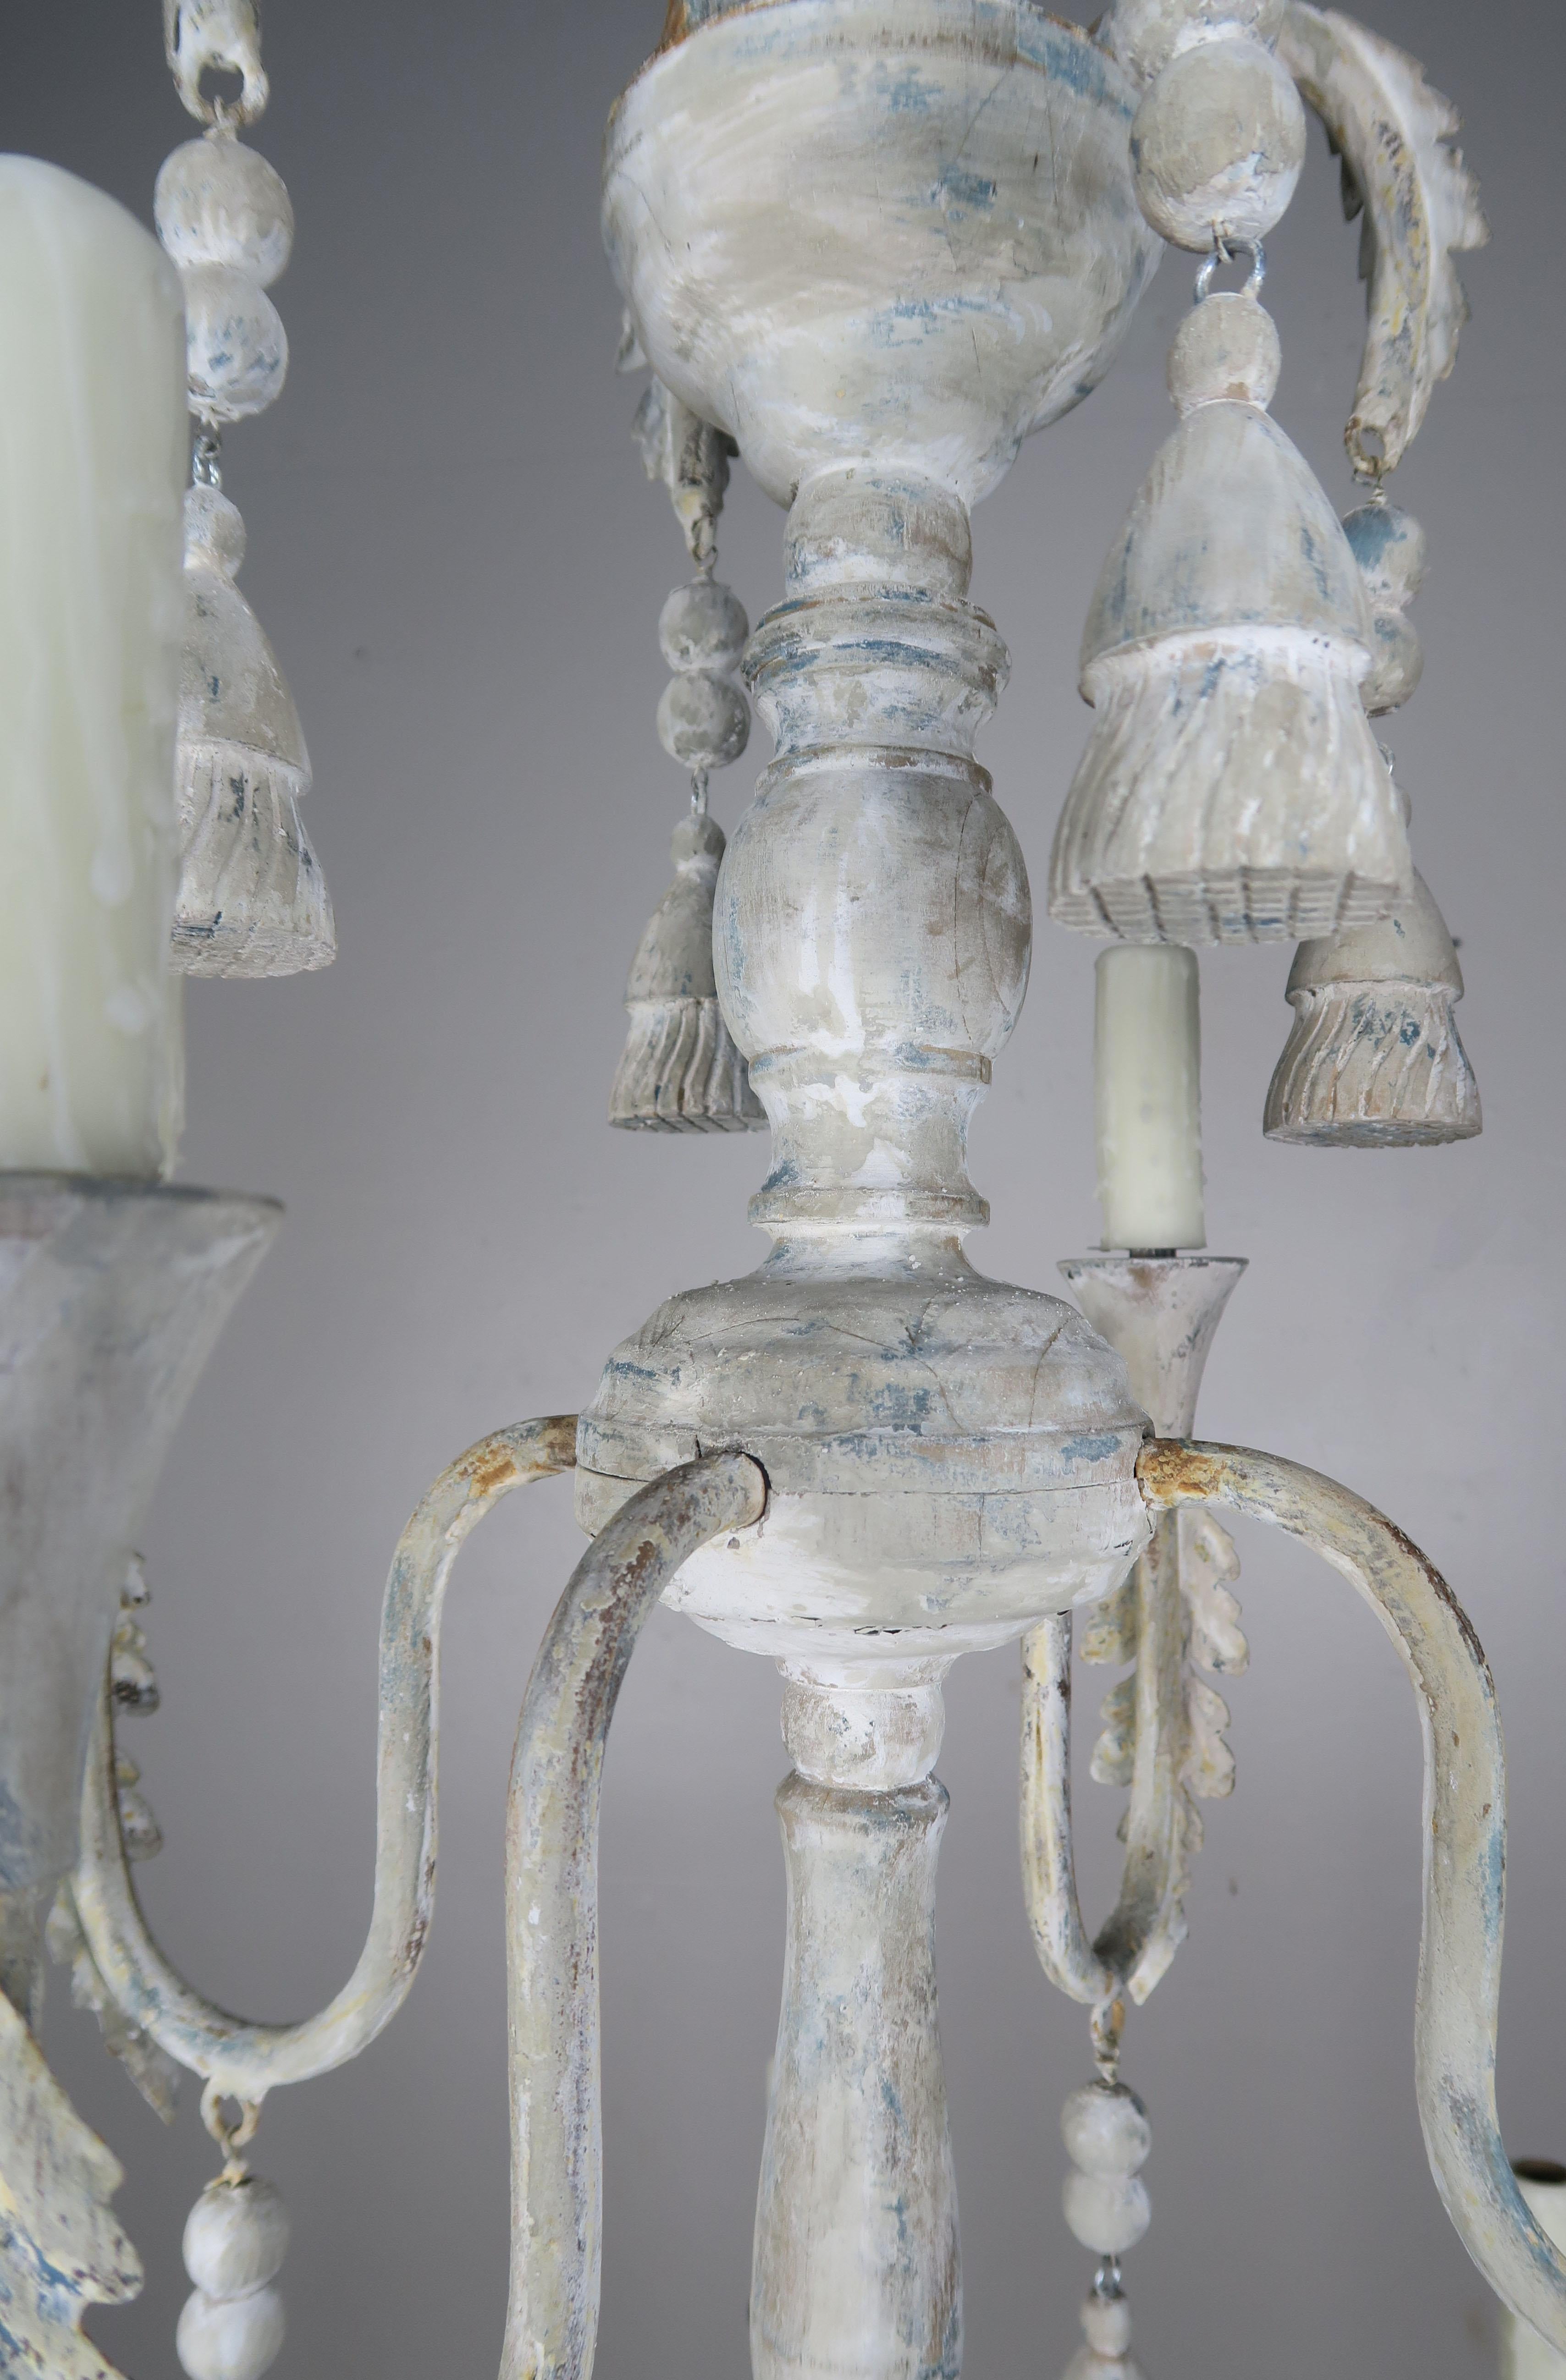 2-Tier Painted Cream Colored Chandeliers with Tassels by Melissa Levinson 2